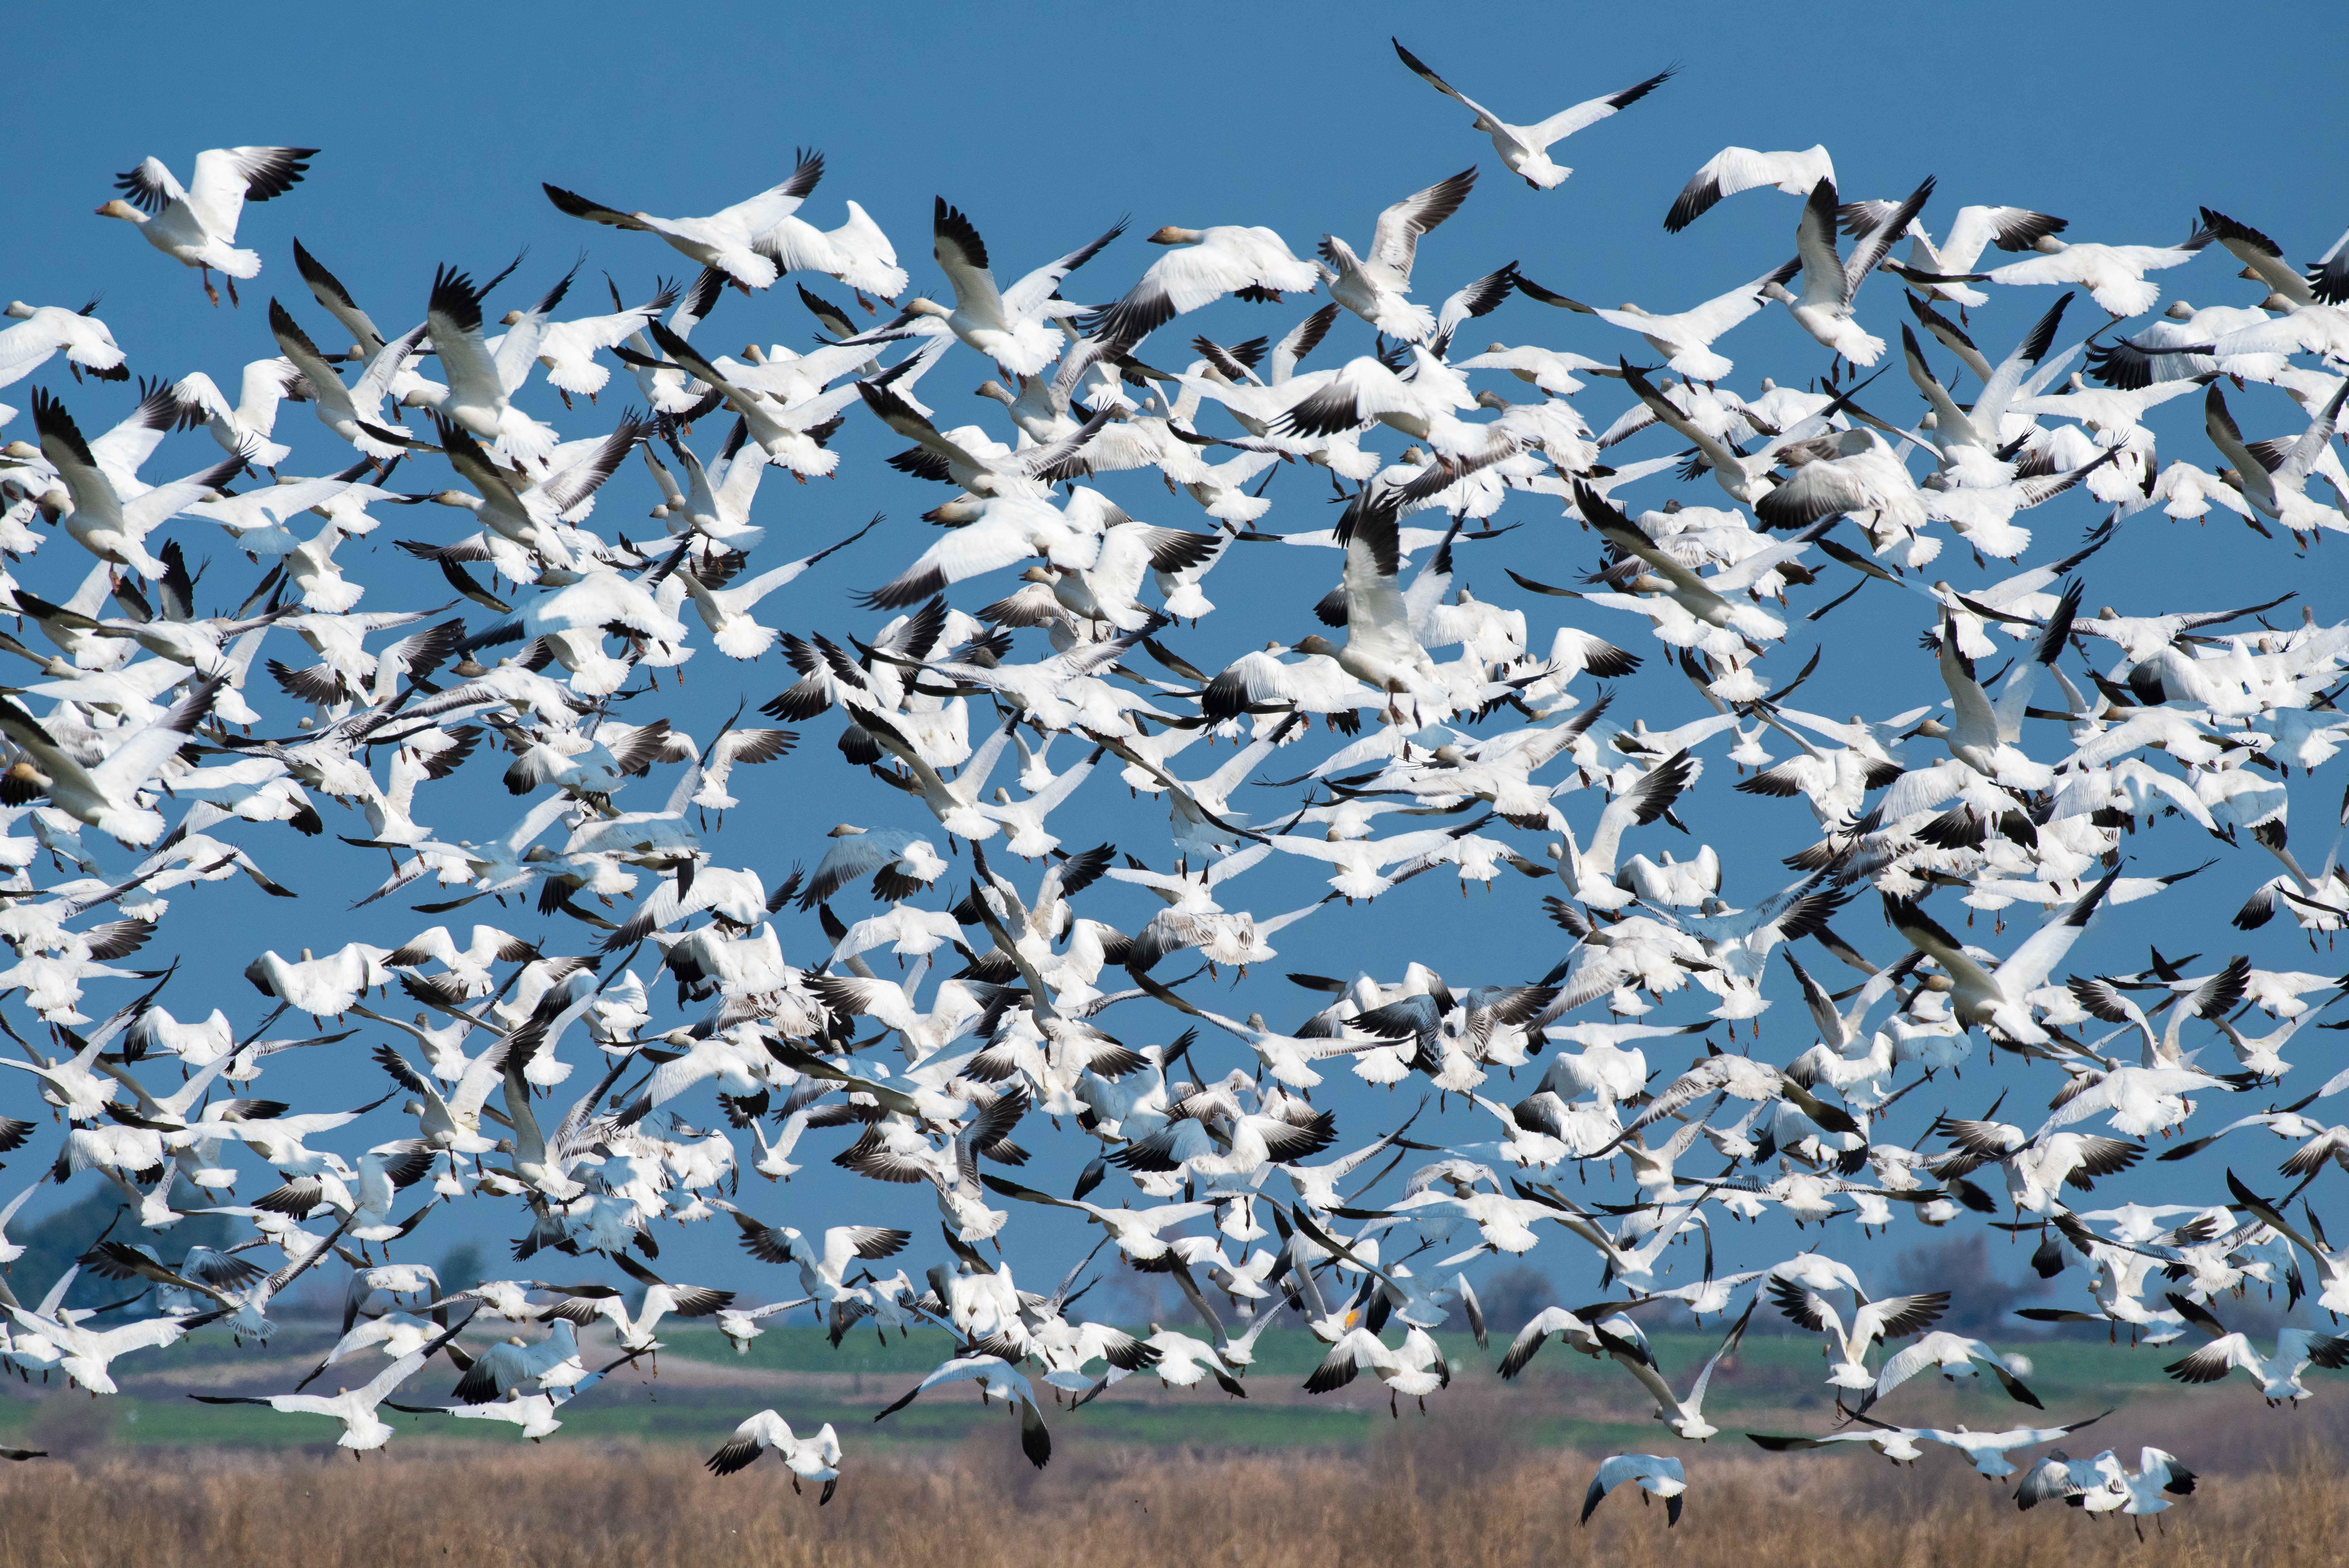 Flock of Snow Geese take flight above a field on Twitchell Island in the Sacramento-San Joaquin River Delta.